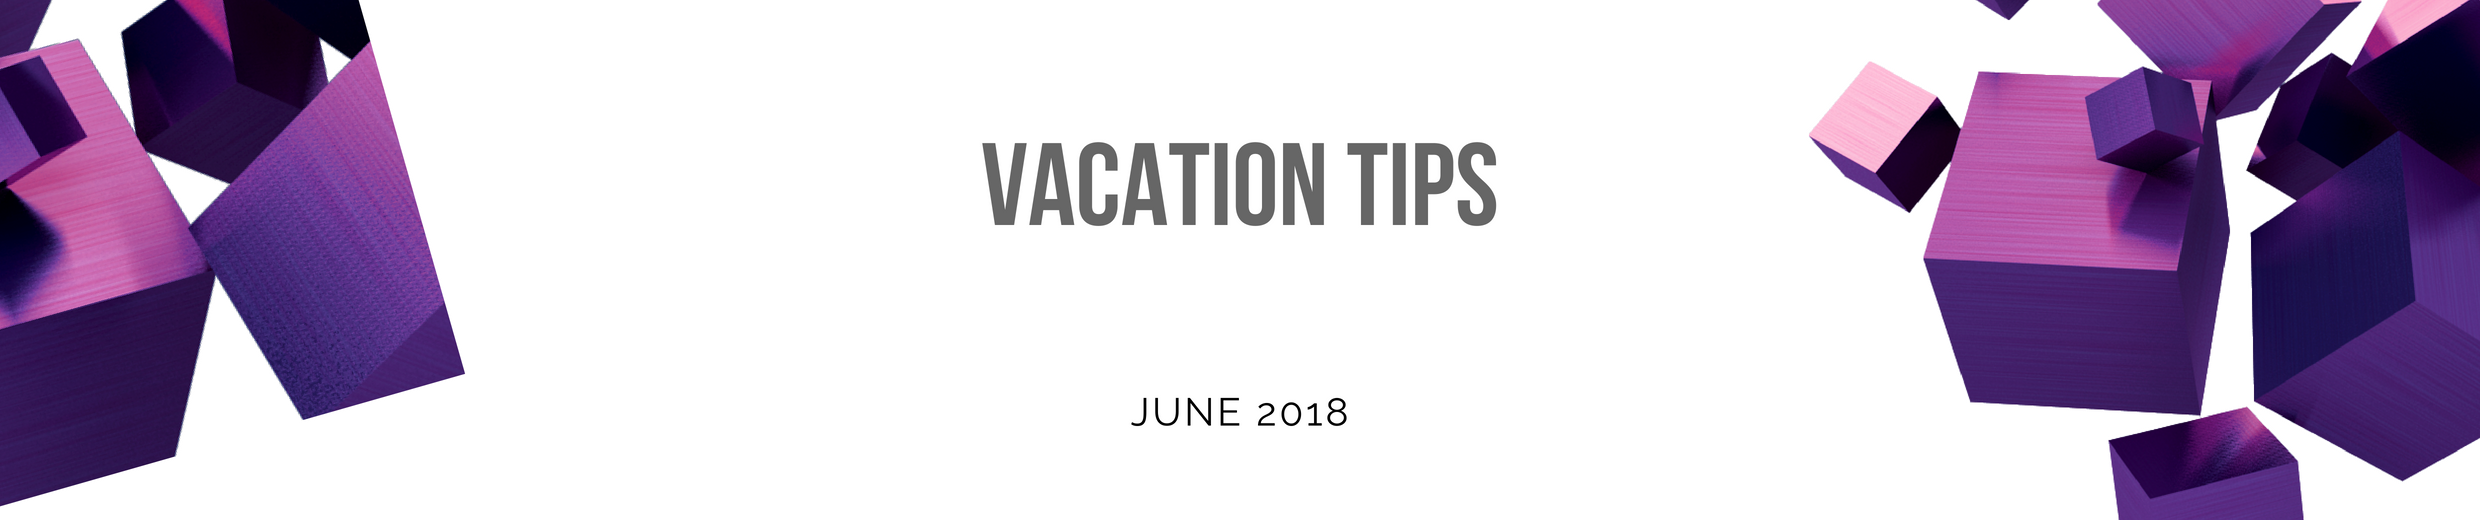 Vacation and Back to school tips